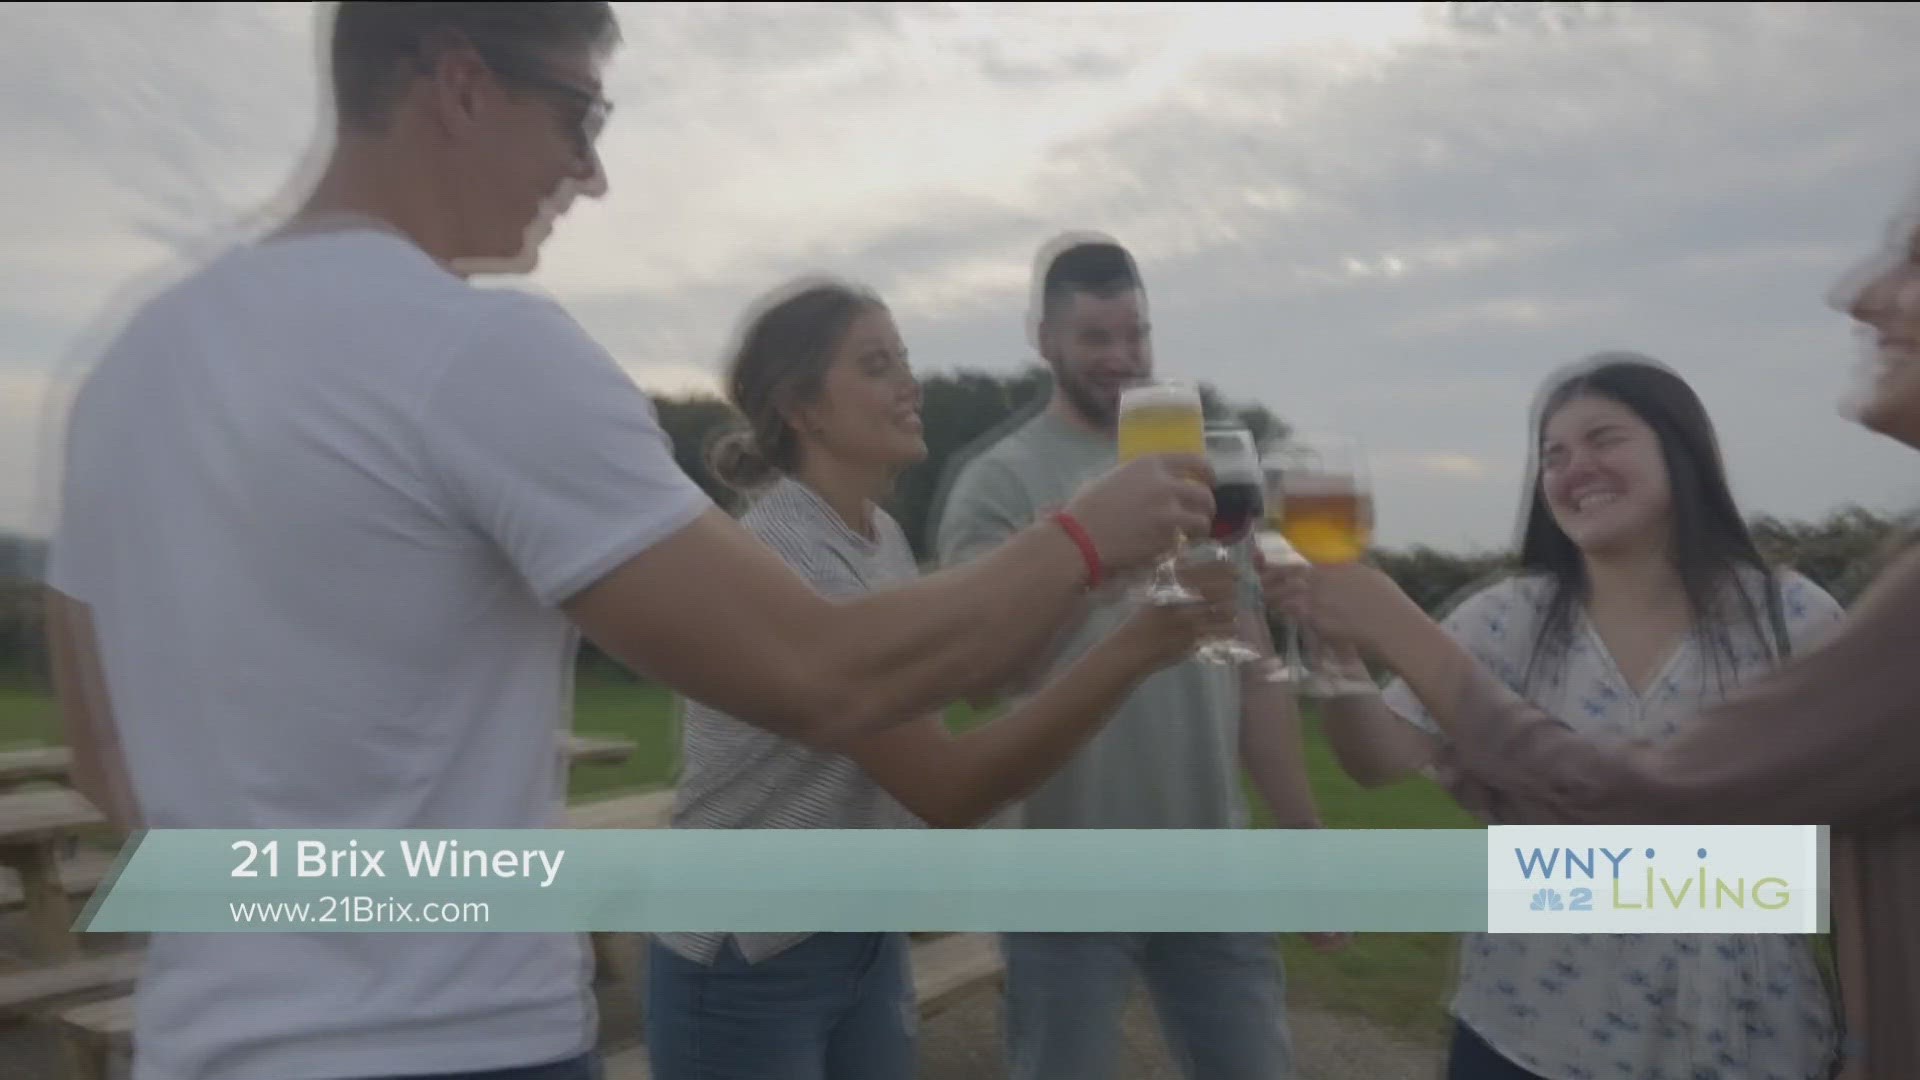 WNY Living - August 5 - 21 Brix Winery (THIS VIDEO IS SPONSORED BY 21 BRIX WINERY)